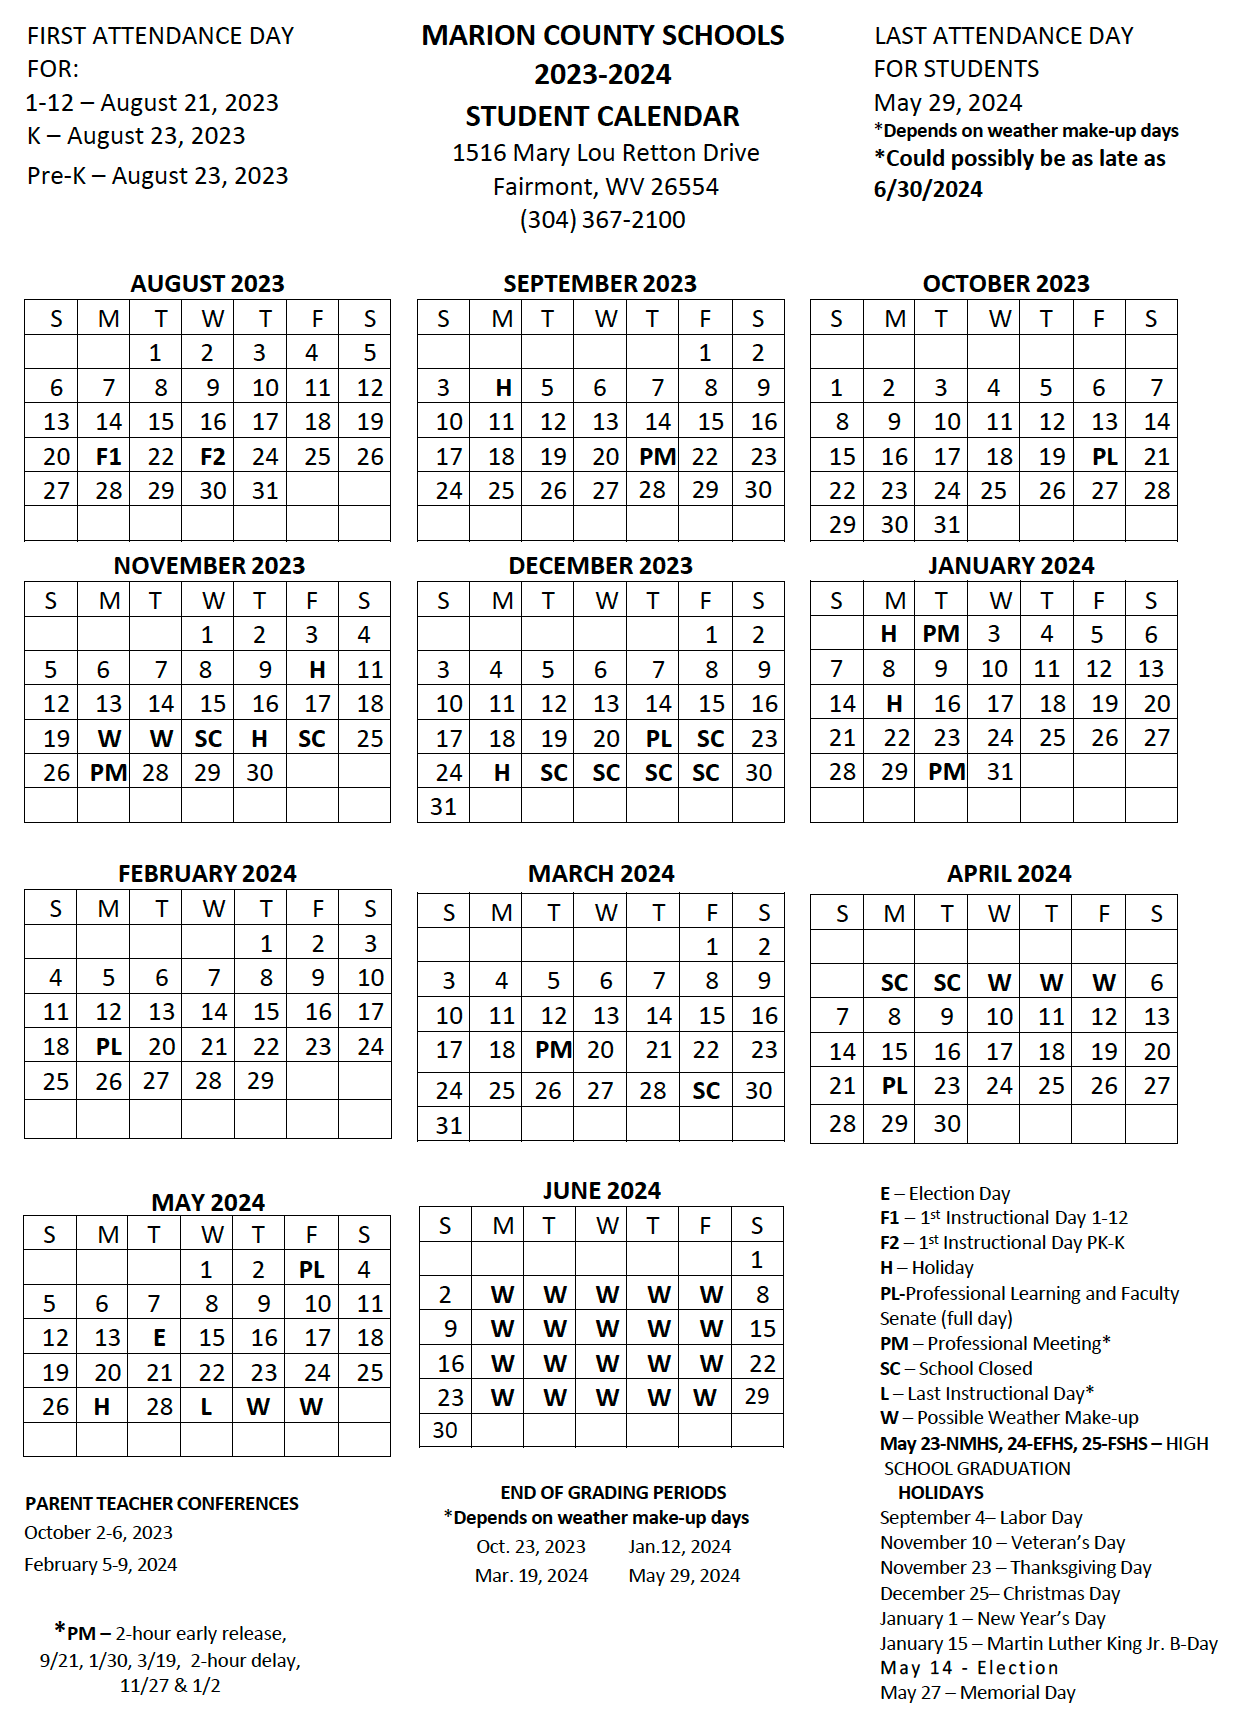 2023-2024 Student Calendar Image - Click for Text Reader File